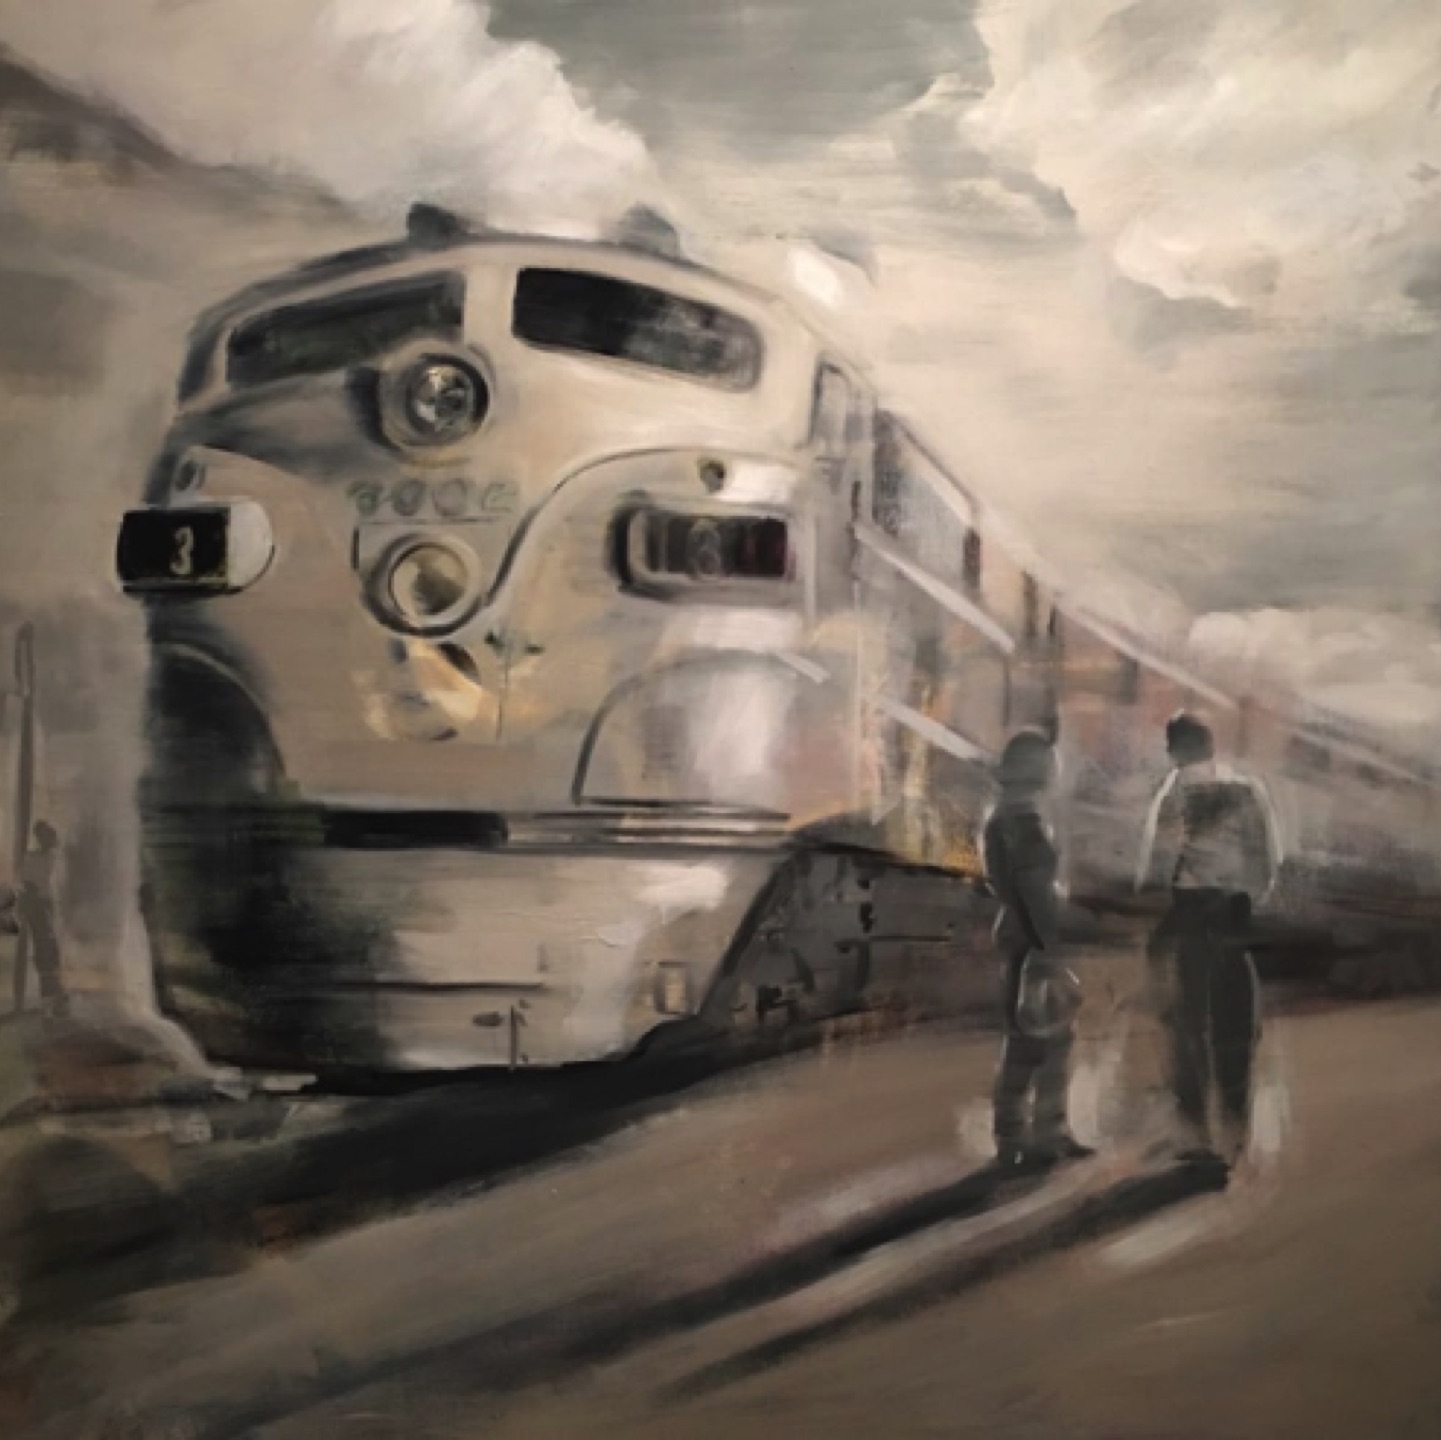 Gregg Chadwick
The Sunset Limited (Palm Springs Station)
40"x40" oil on linen 2016
Robert Amodeo Collection, Phoenix, Arizona